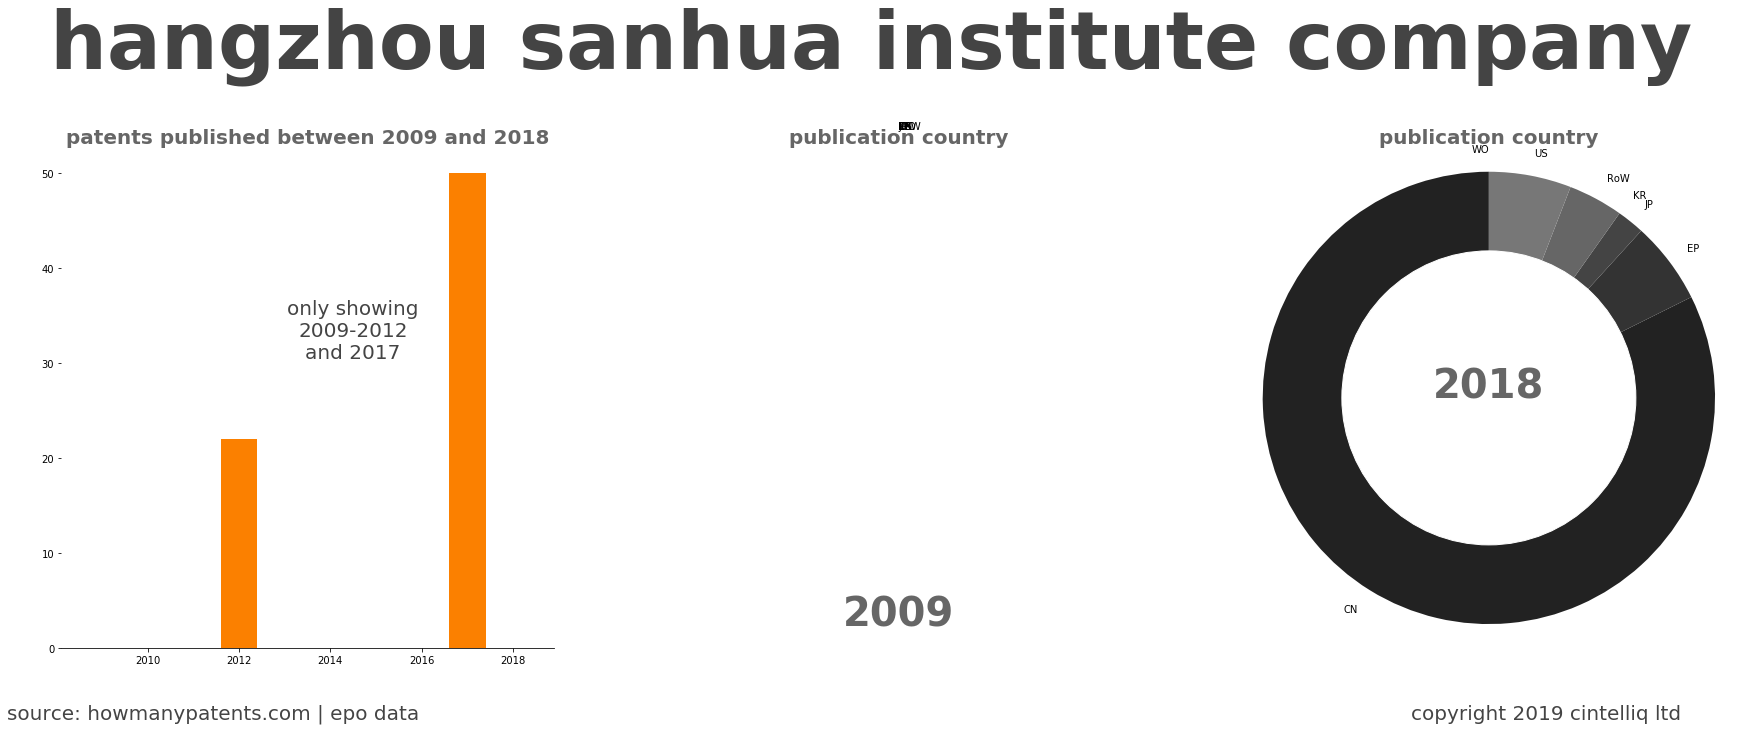 summary of patents for Hangzhou Sanhua Institute Company